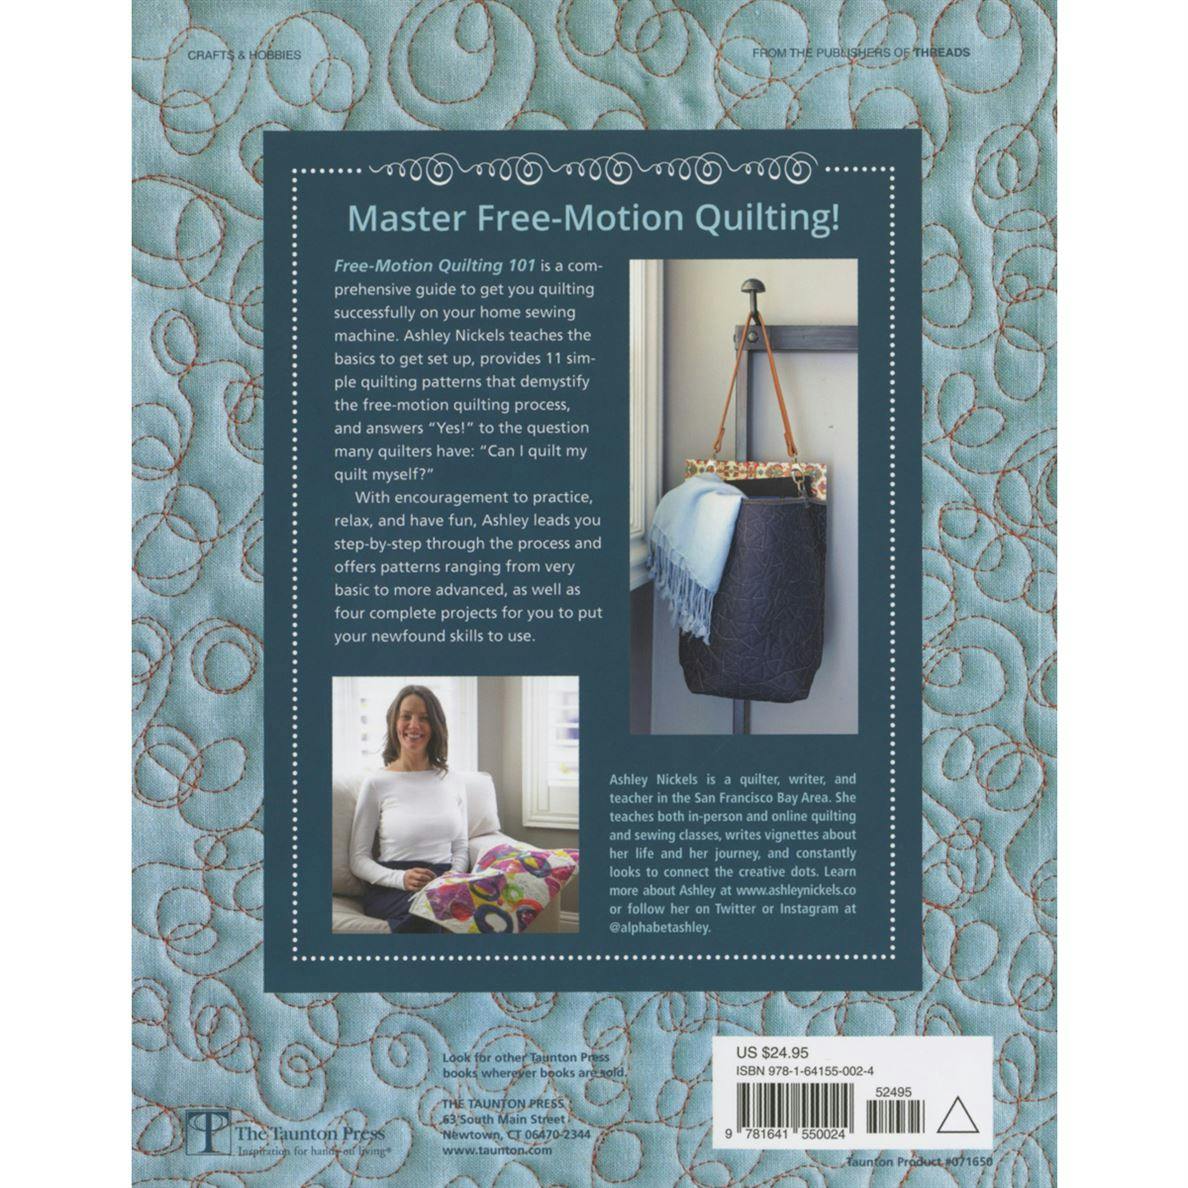 Back cover of Free-Motion Quilting 101 book